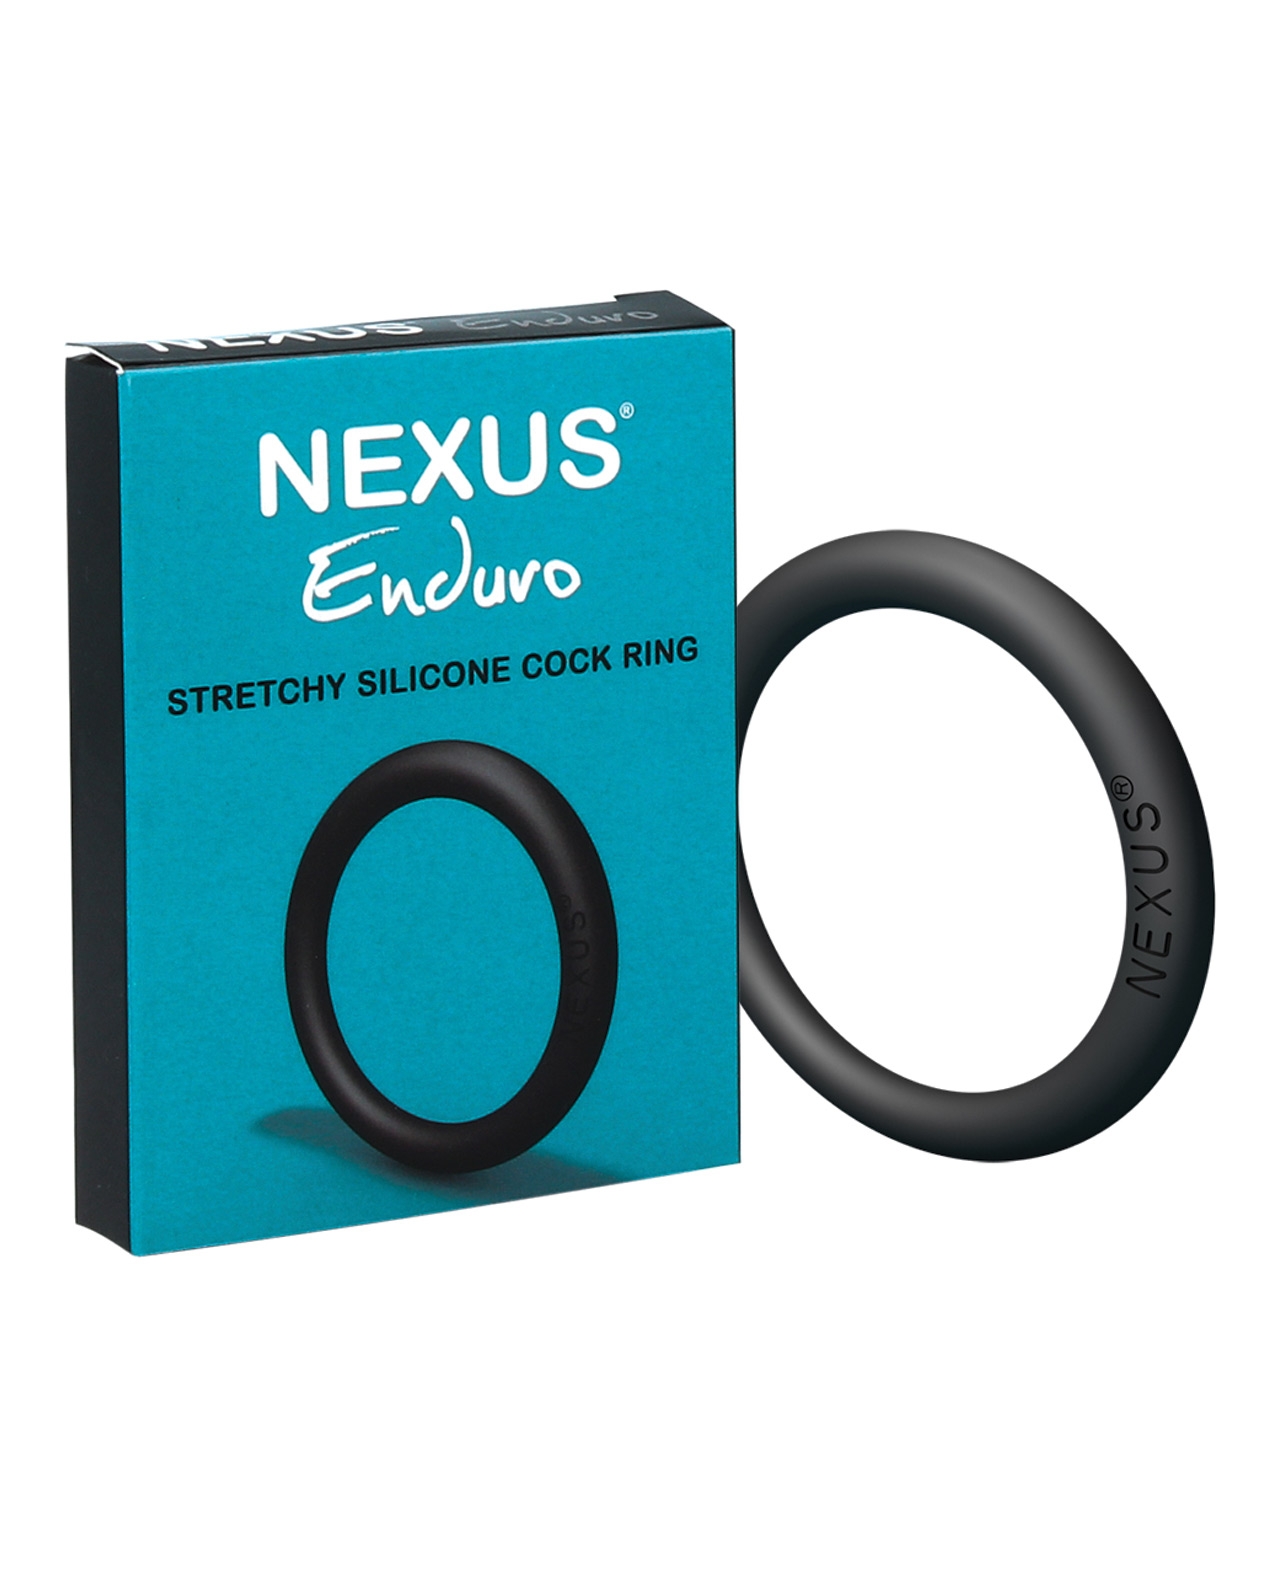 Mompelen mei Heup Nexus Enduro Silicone Cock Ring - Black by Libertybelle marketing | Cupid's  Lingerie